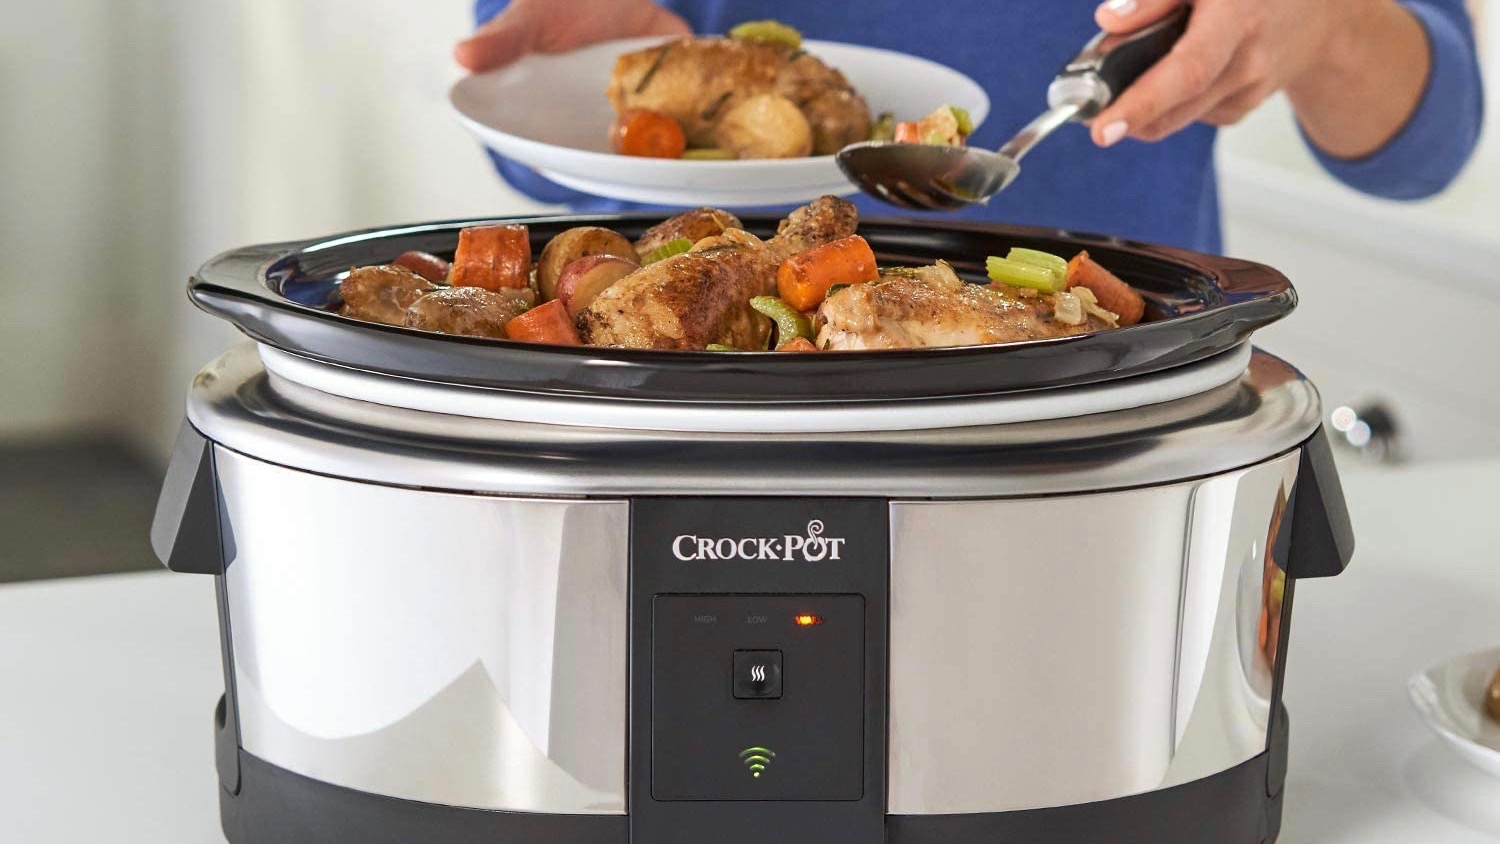 All-Clad Programmable Oval-Shaped Slow Cooker with Black Ceramic